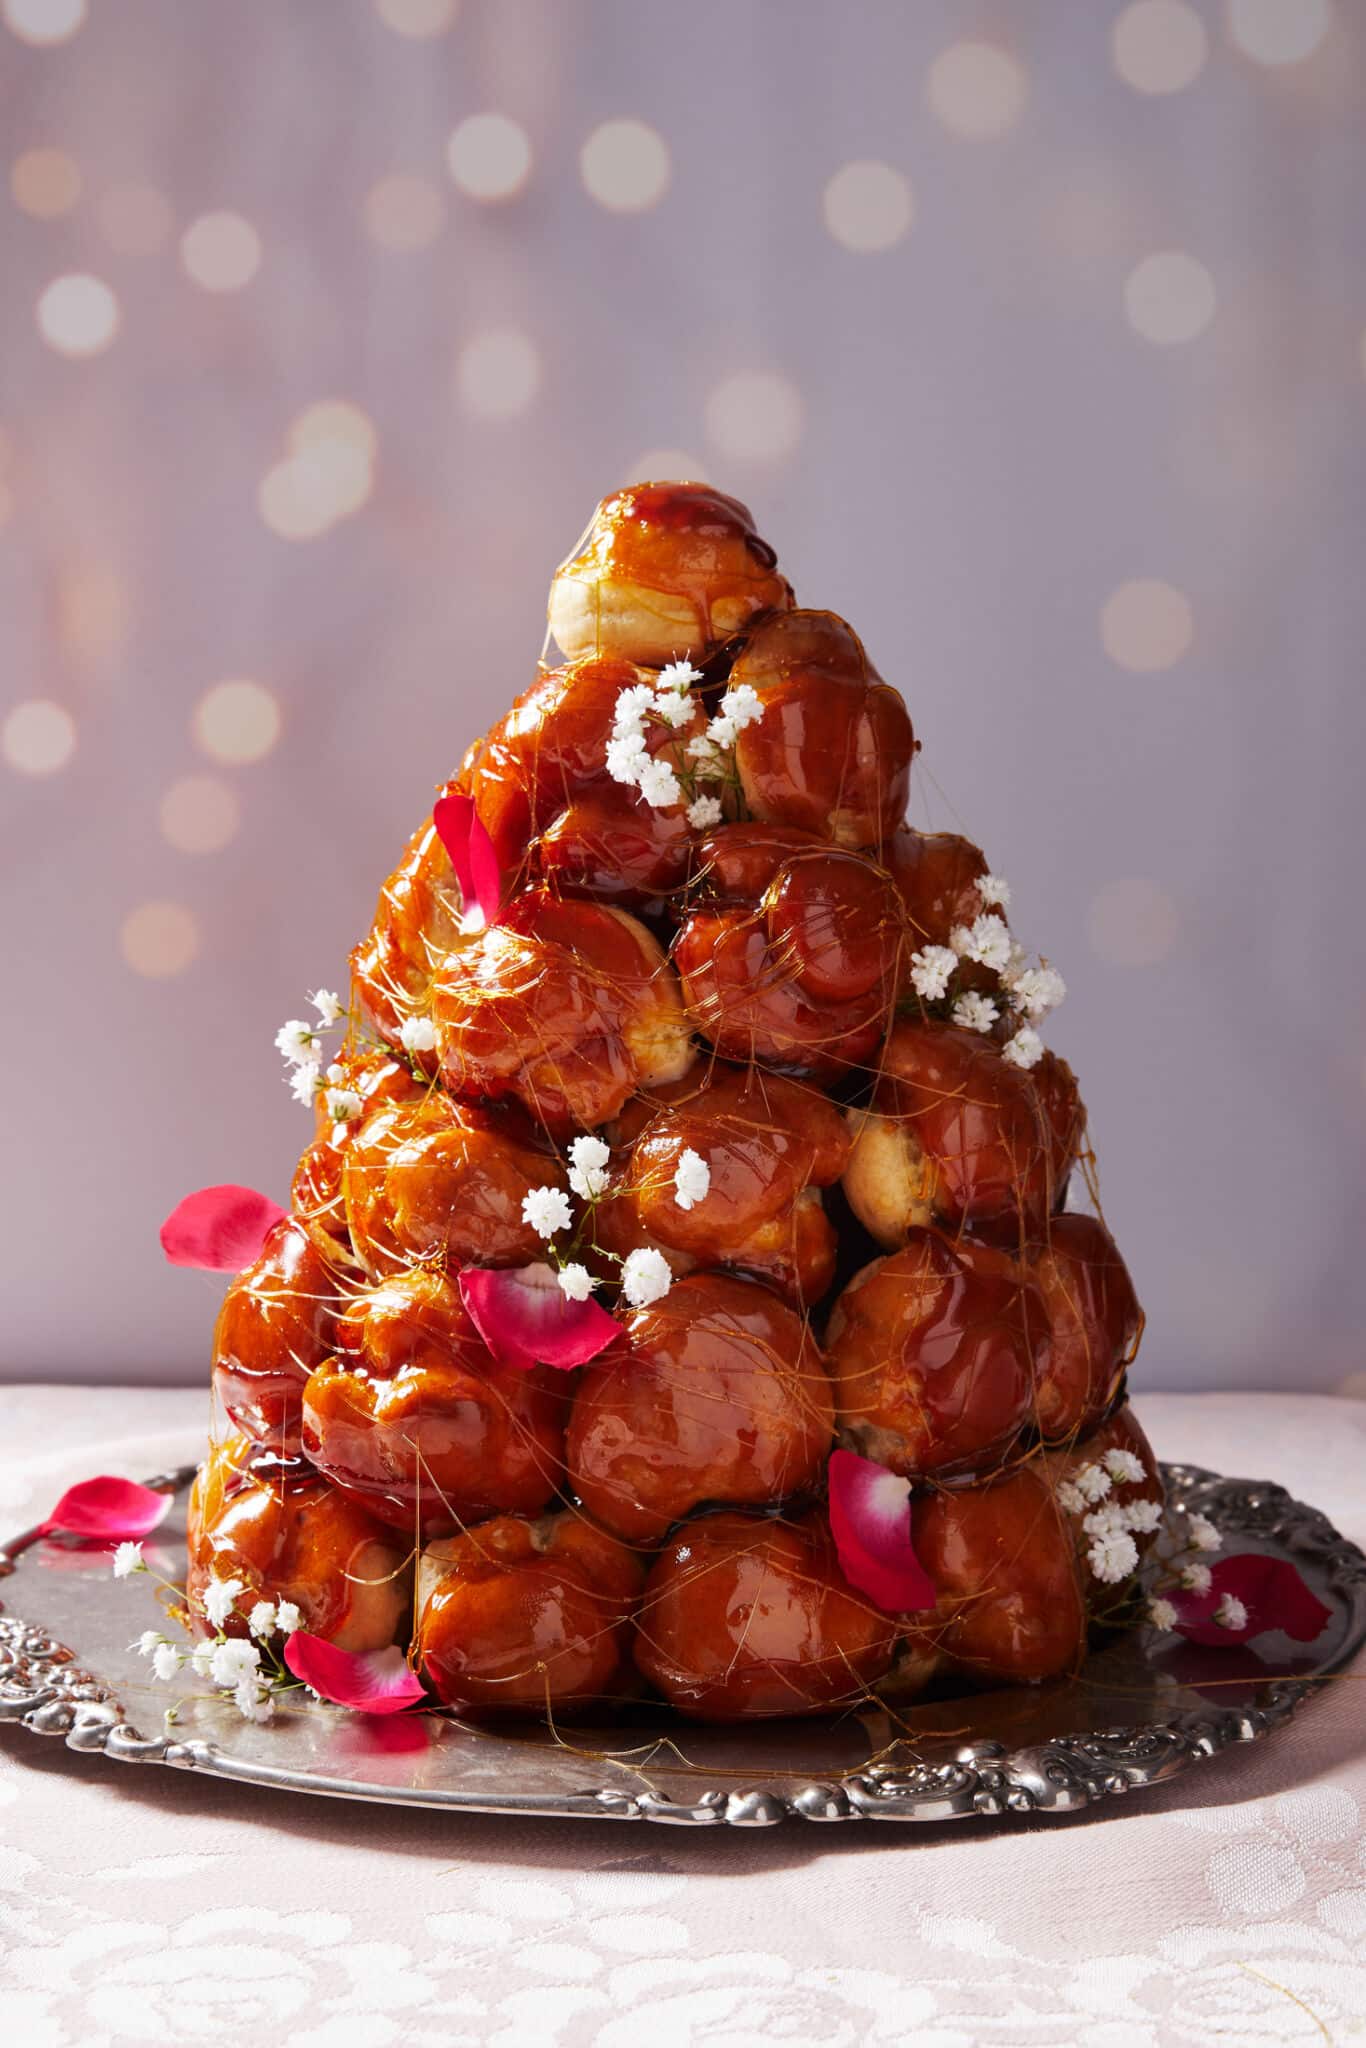 A Croquembouche Tower of profiteroles on a silver tray.